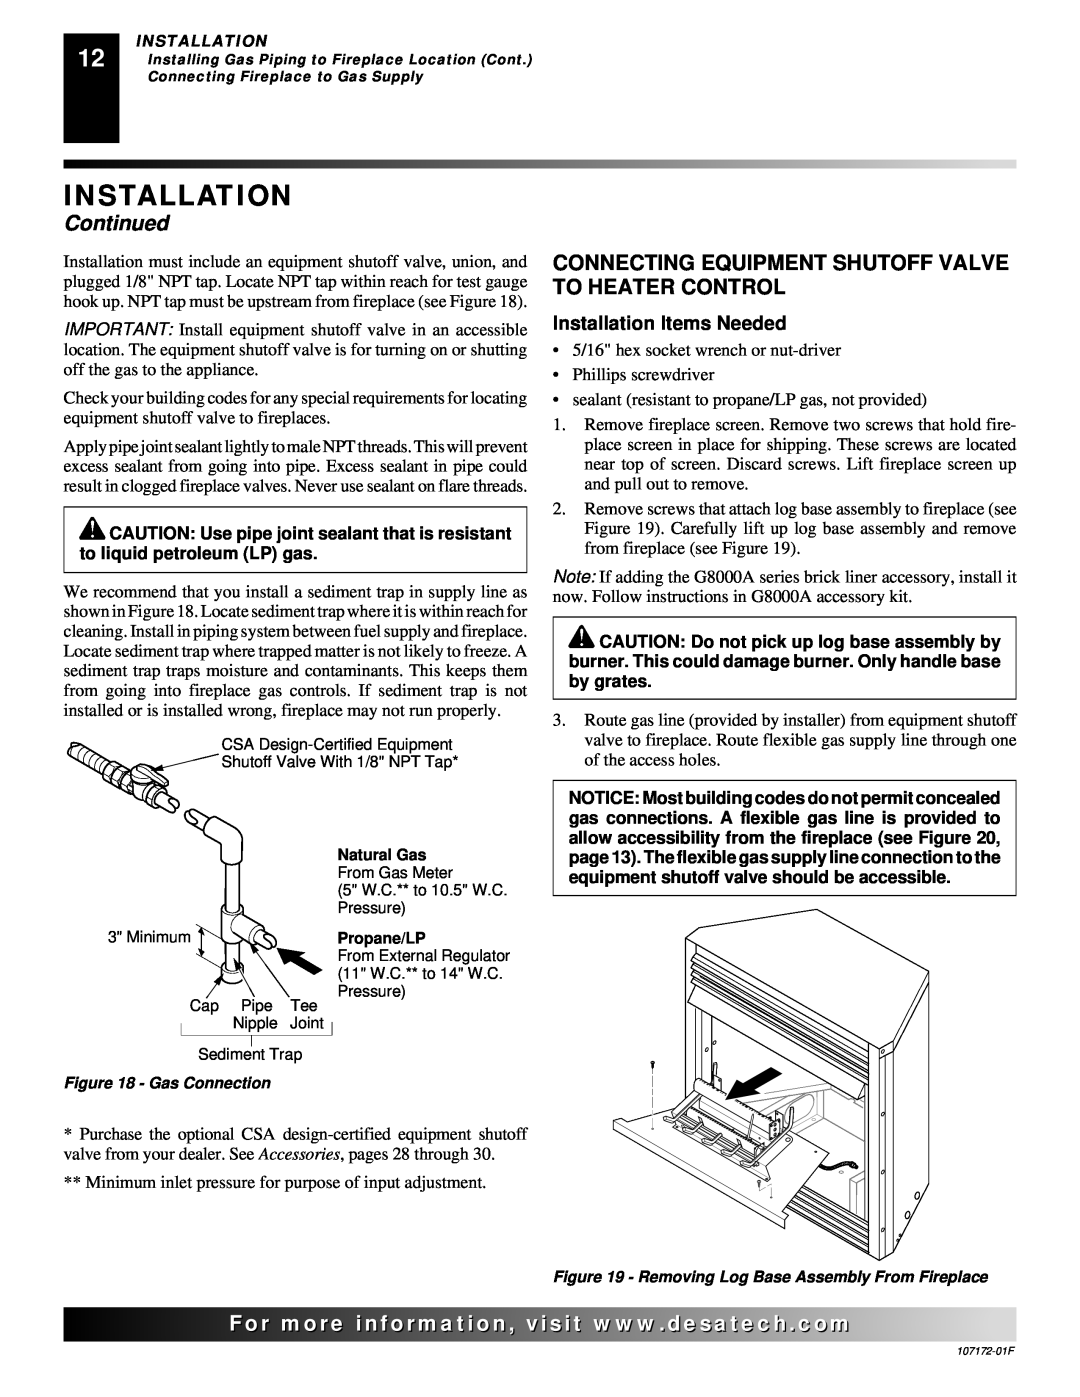 Desa EFS33PR installation manual Continued, Installation Items Needed, 5/16 hex socket wrench or nut-driver 